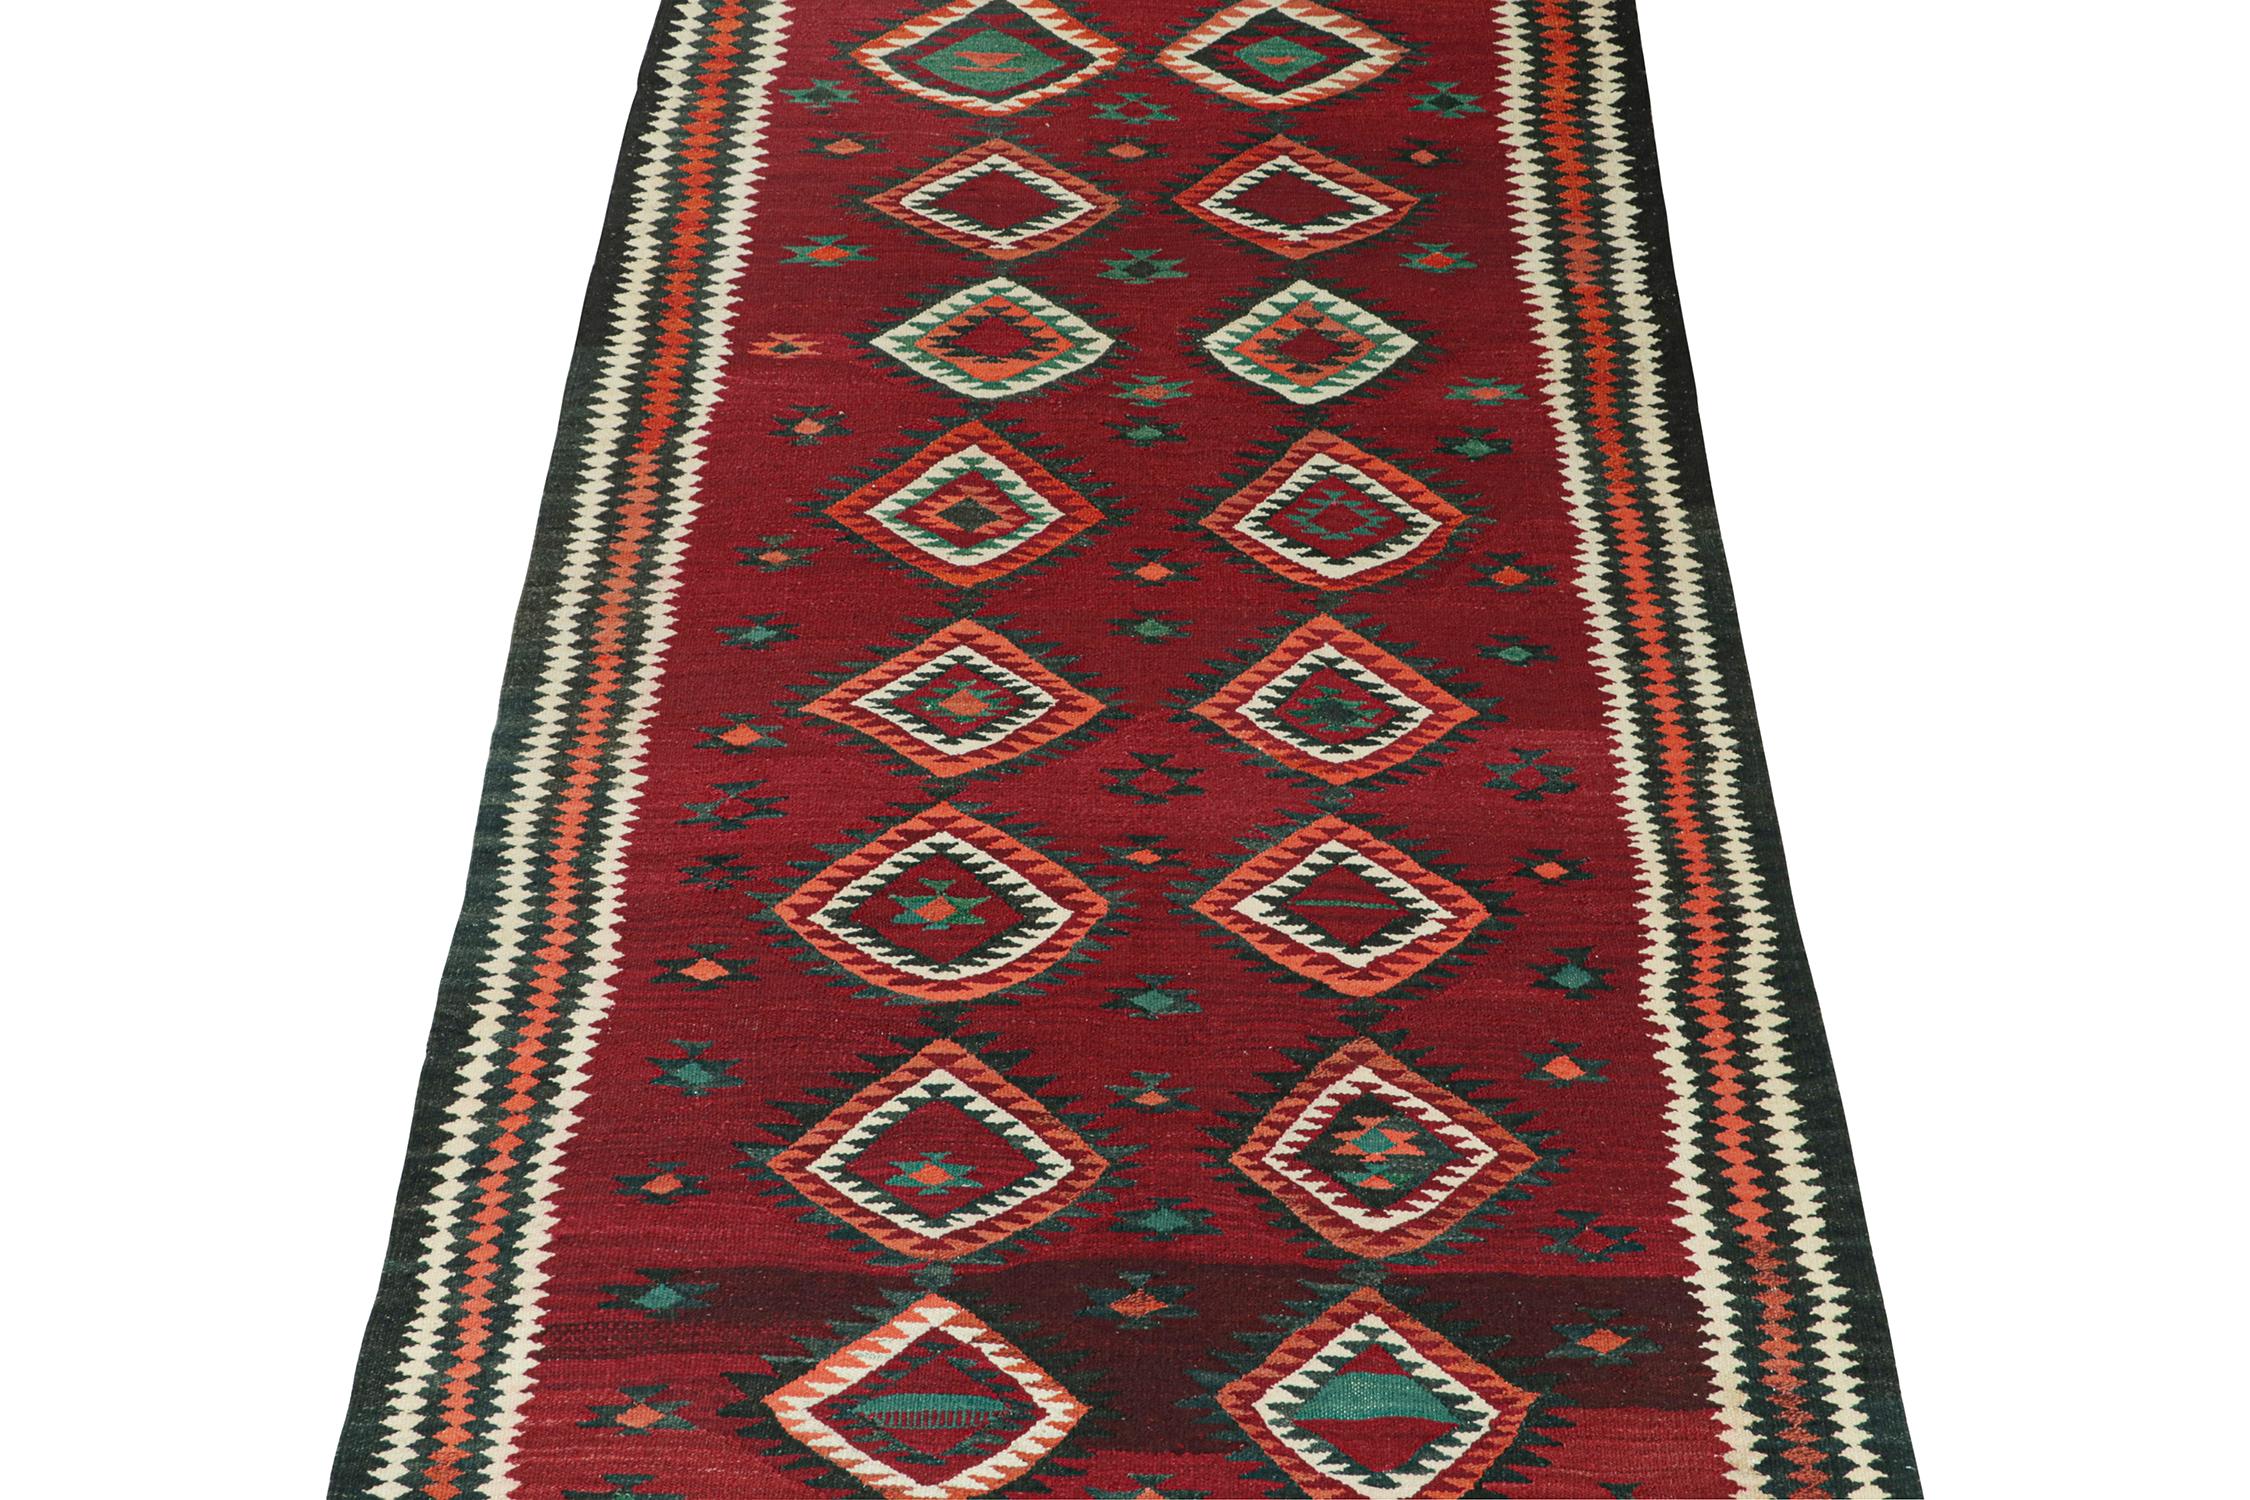 This vintage 5x10 Persian kilim is believed to be a Kurdish tribal rug, handwoven in woo circa 1950-1960. 

Further on the Design:

The design prefers polychromatic medallions on a red open field, wrapped in charcoal, white, and salmon borders. Keen